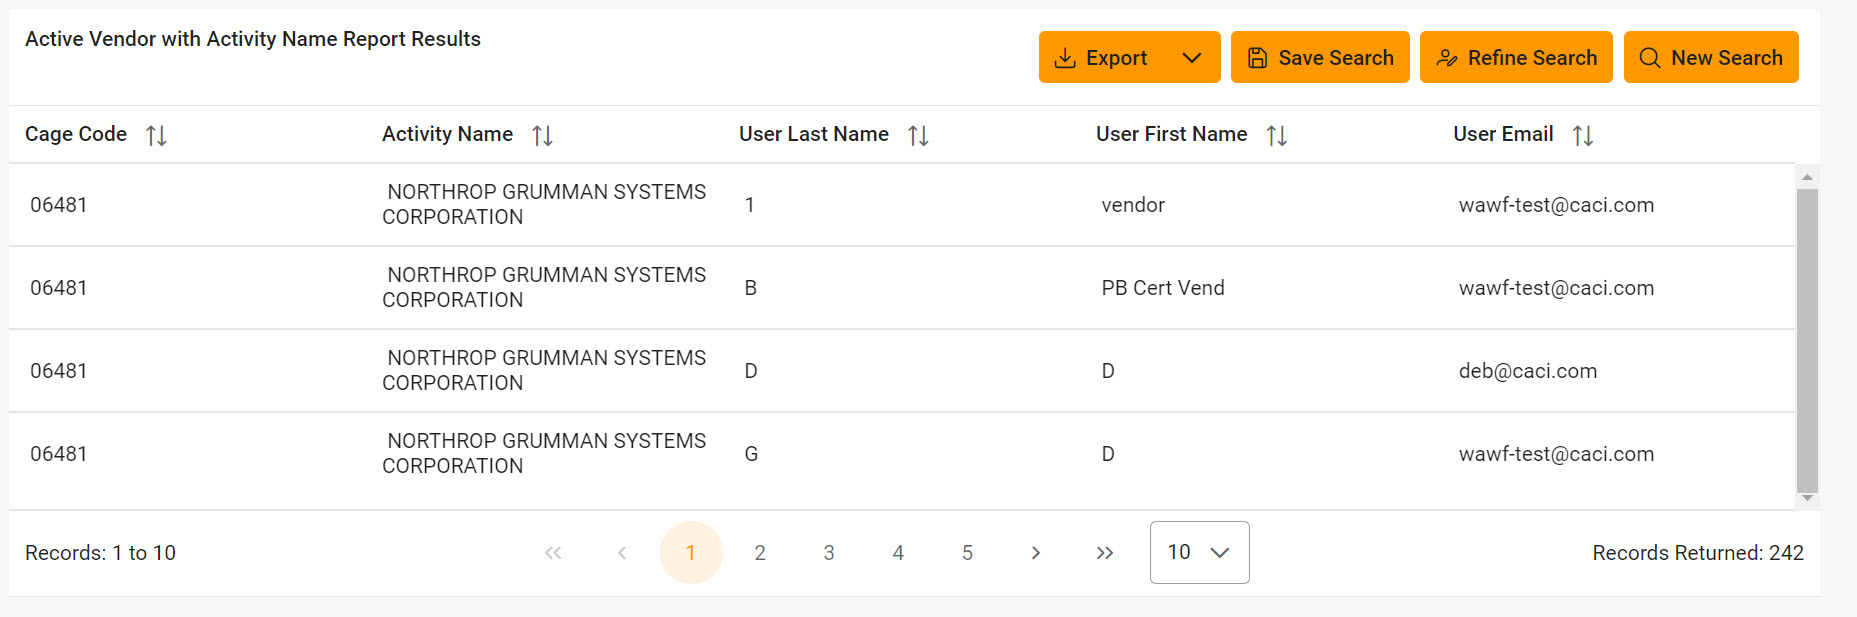 The image provides a preview of the Active Vendor with Activity Name Report Results Overview.